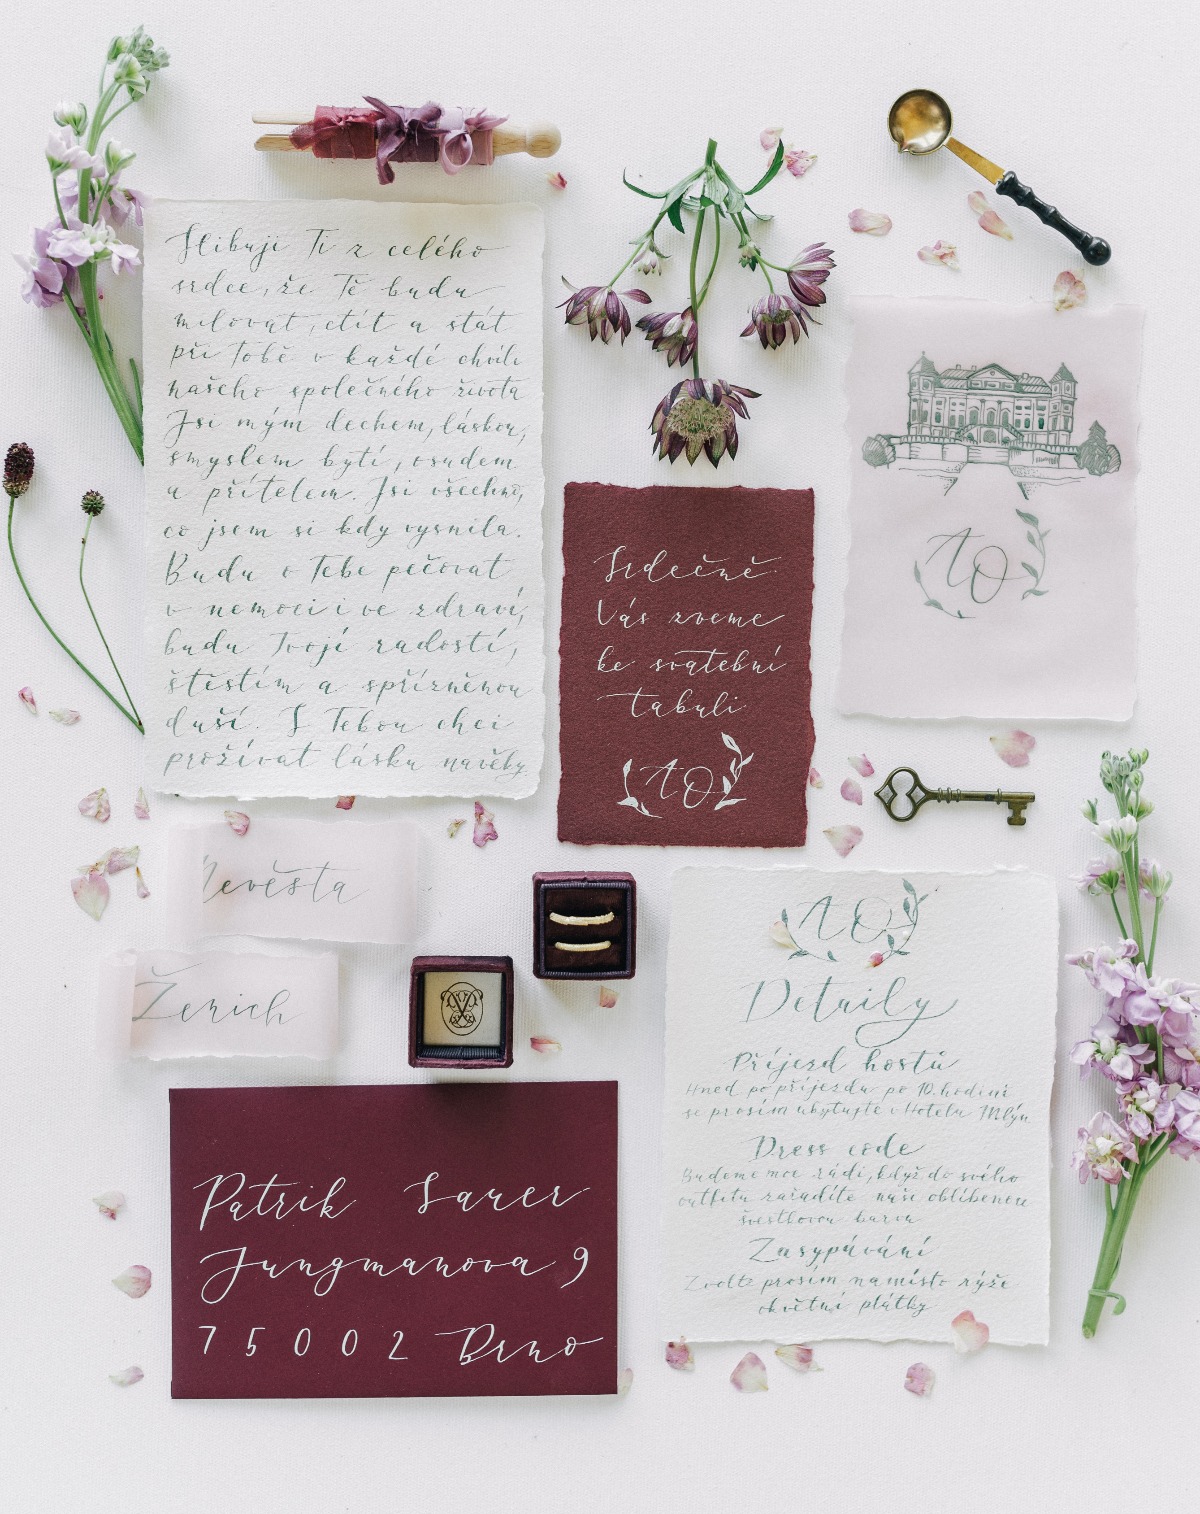 Gracefulness: Pure inspiration for the Wedding Day